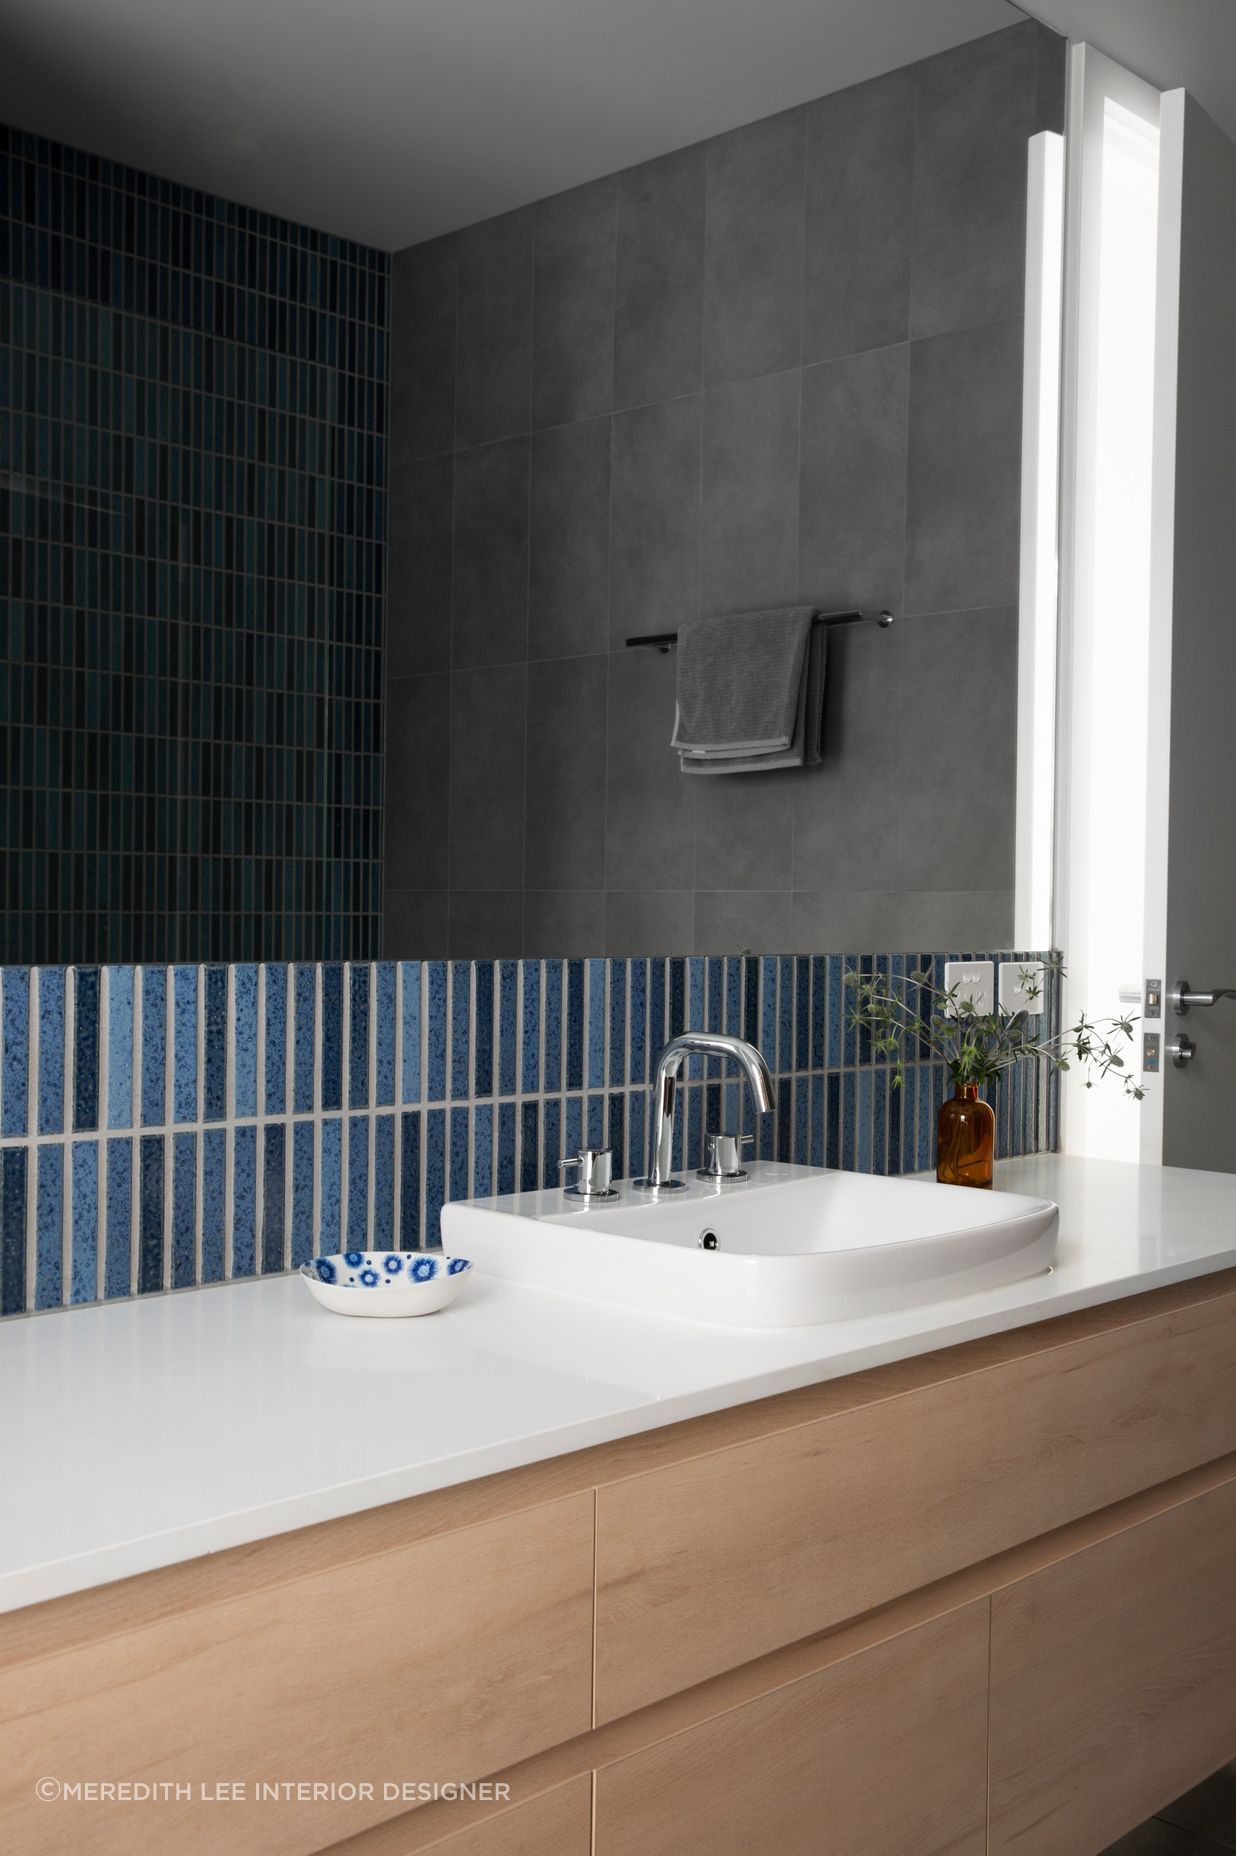 Tiles that incorporate different shades of blue are an easy way to bring a coastal theme to a bathroom.